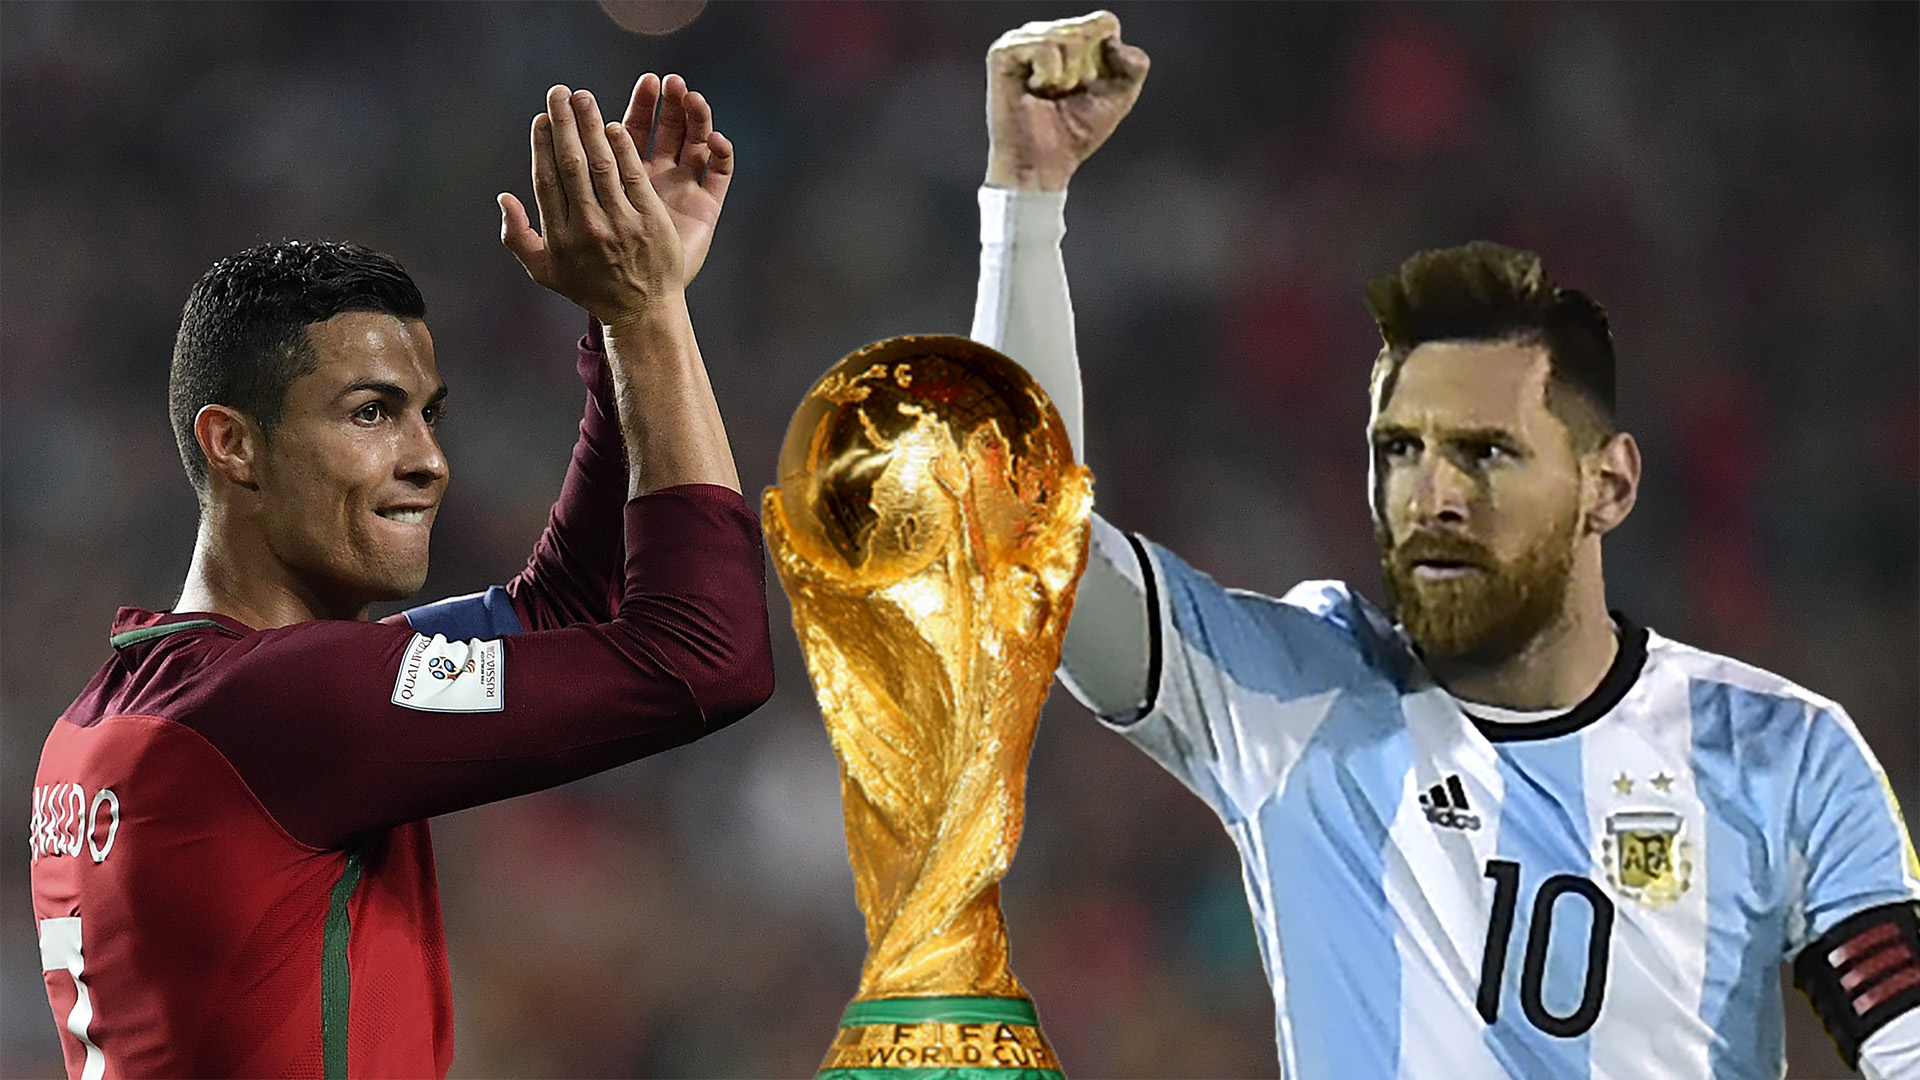 World Cup 2018 prize money: How much do the winners get & countries